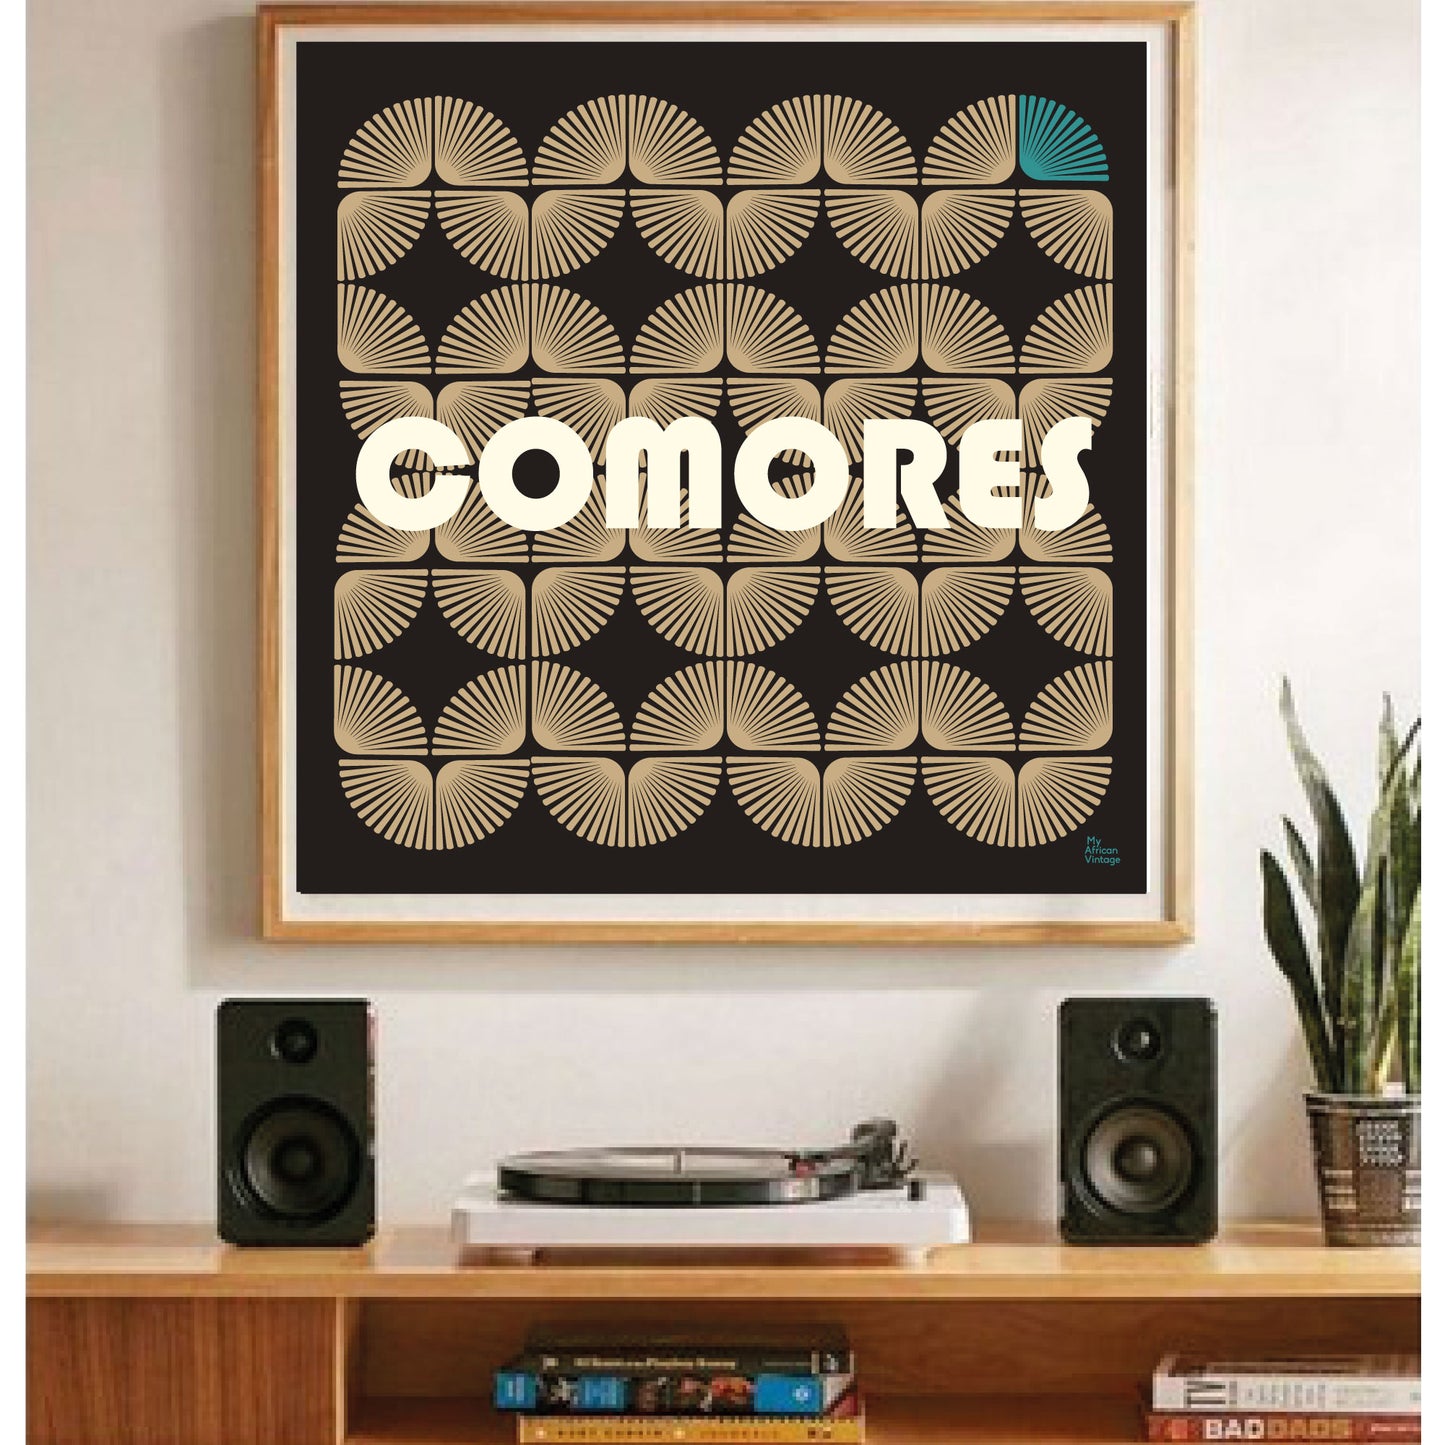 "Comoros" retro style poster -  "My African Vintage" collection